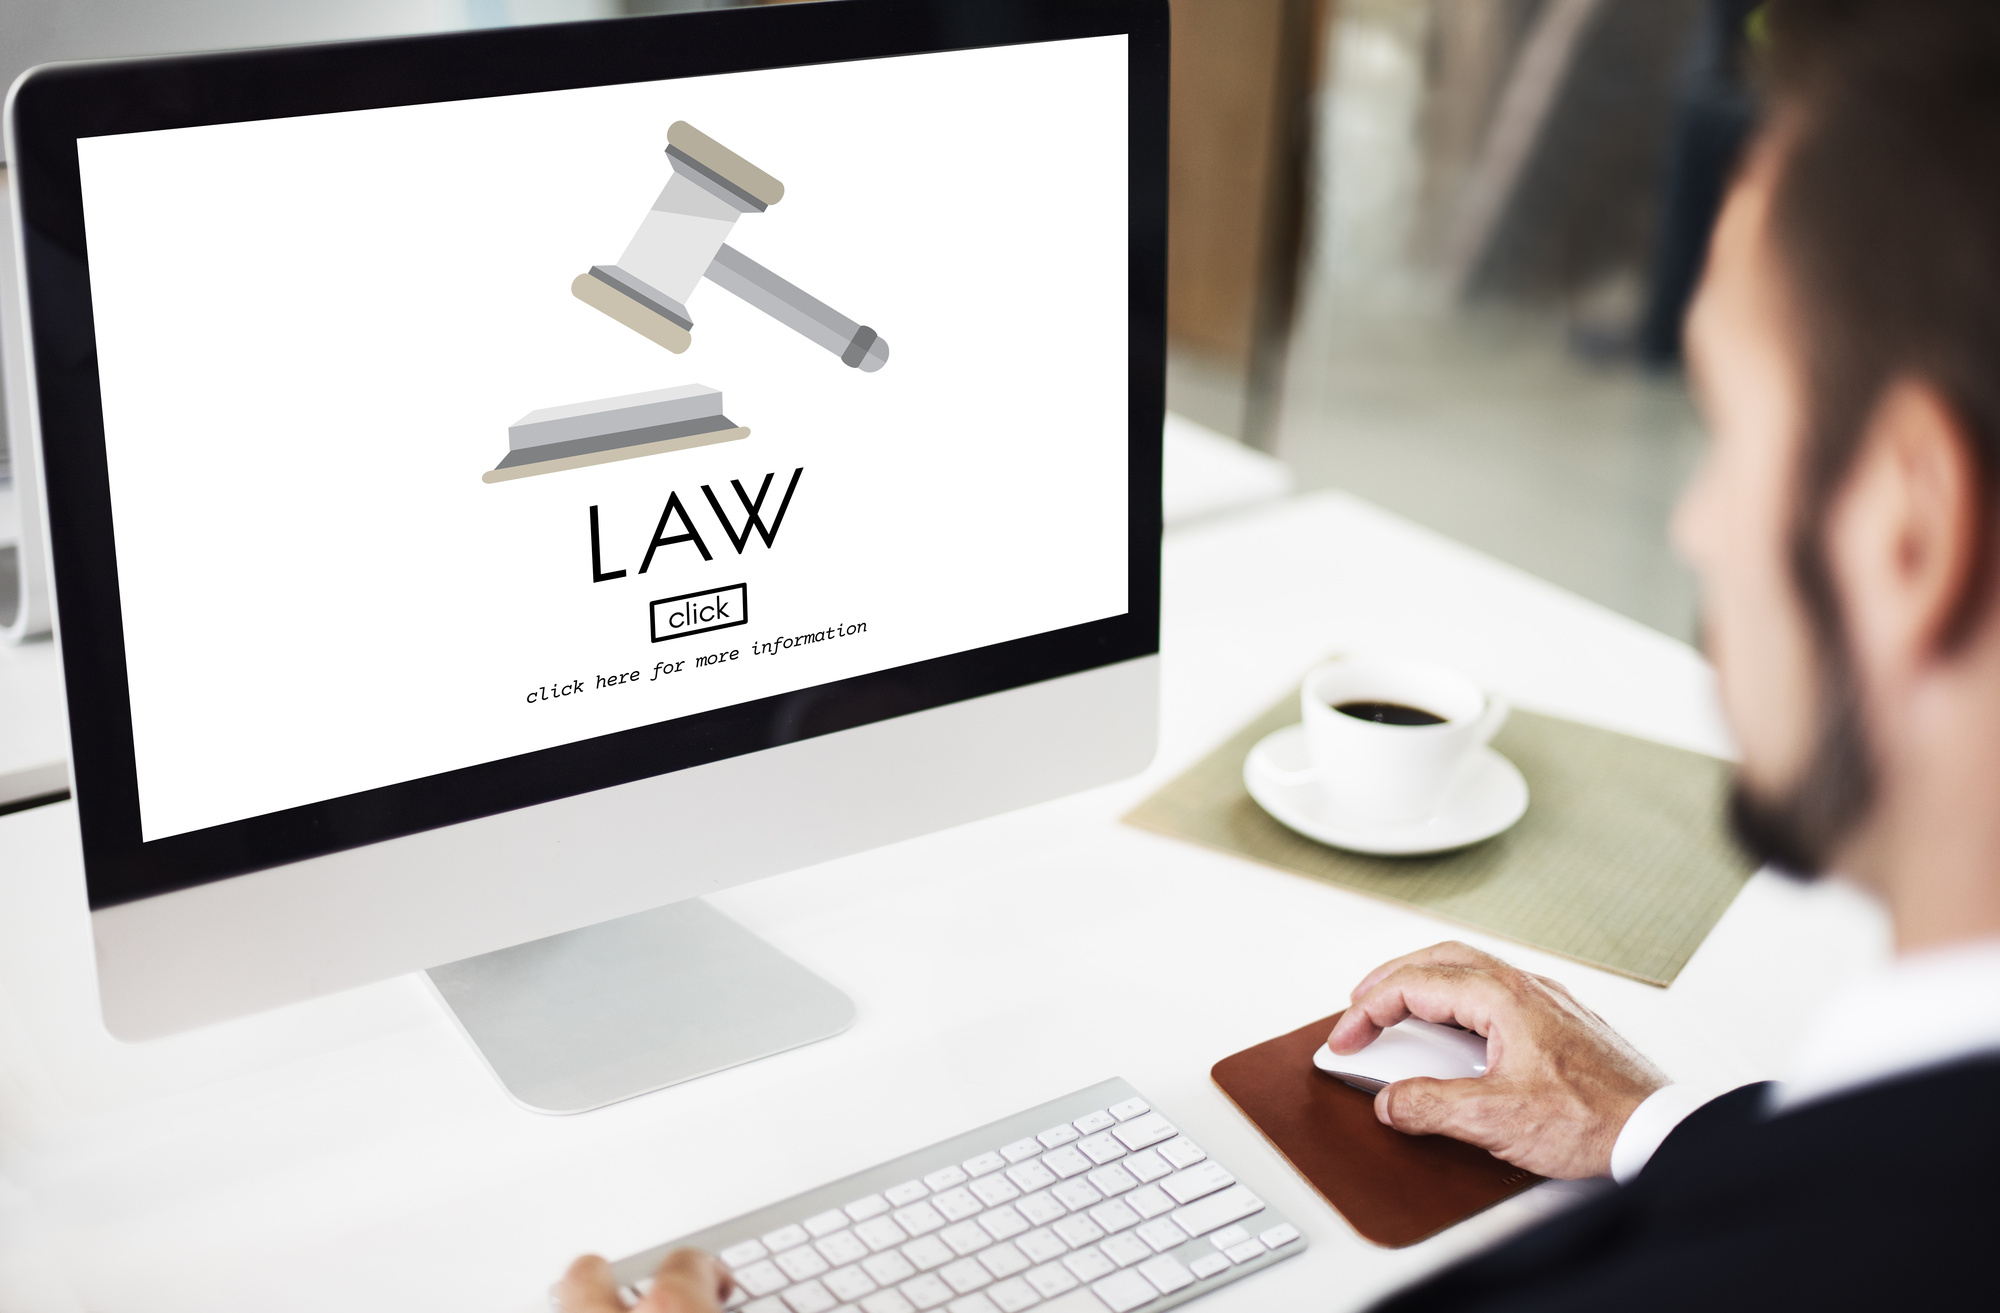 5 Tips for Online Marketing for Law Firms